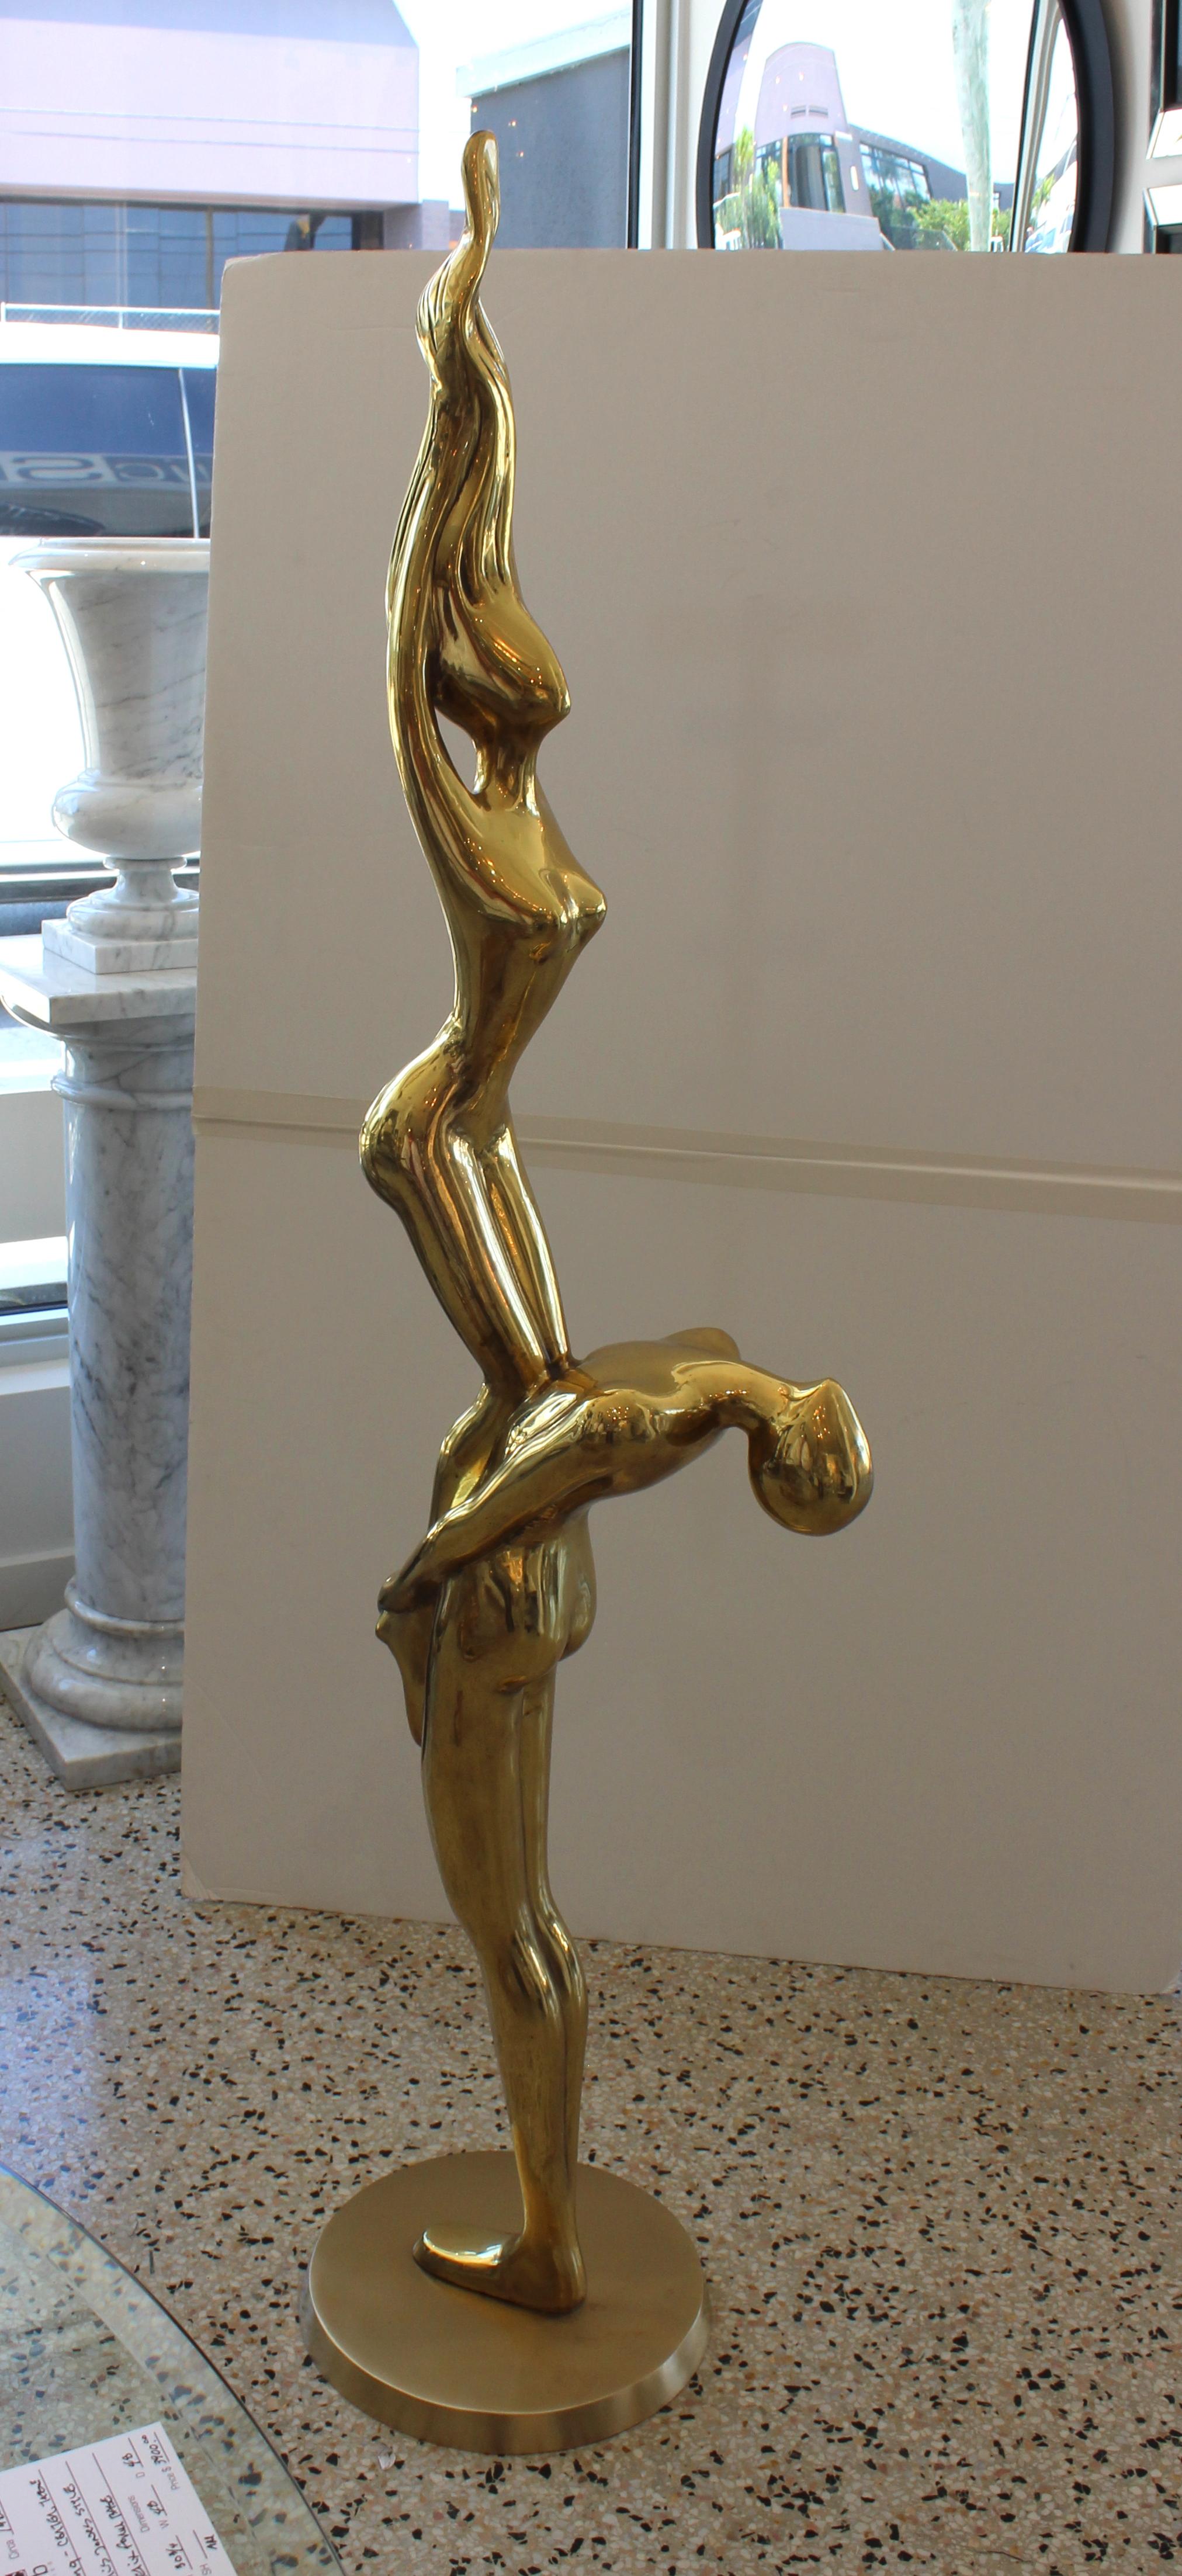 Abstract Sculpture of Stylized Acrobats In Good Condition For Sale In West Palm Beach, FL